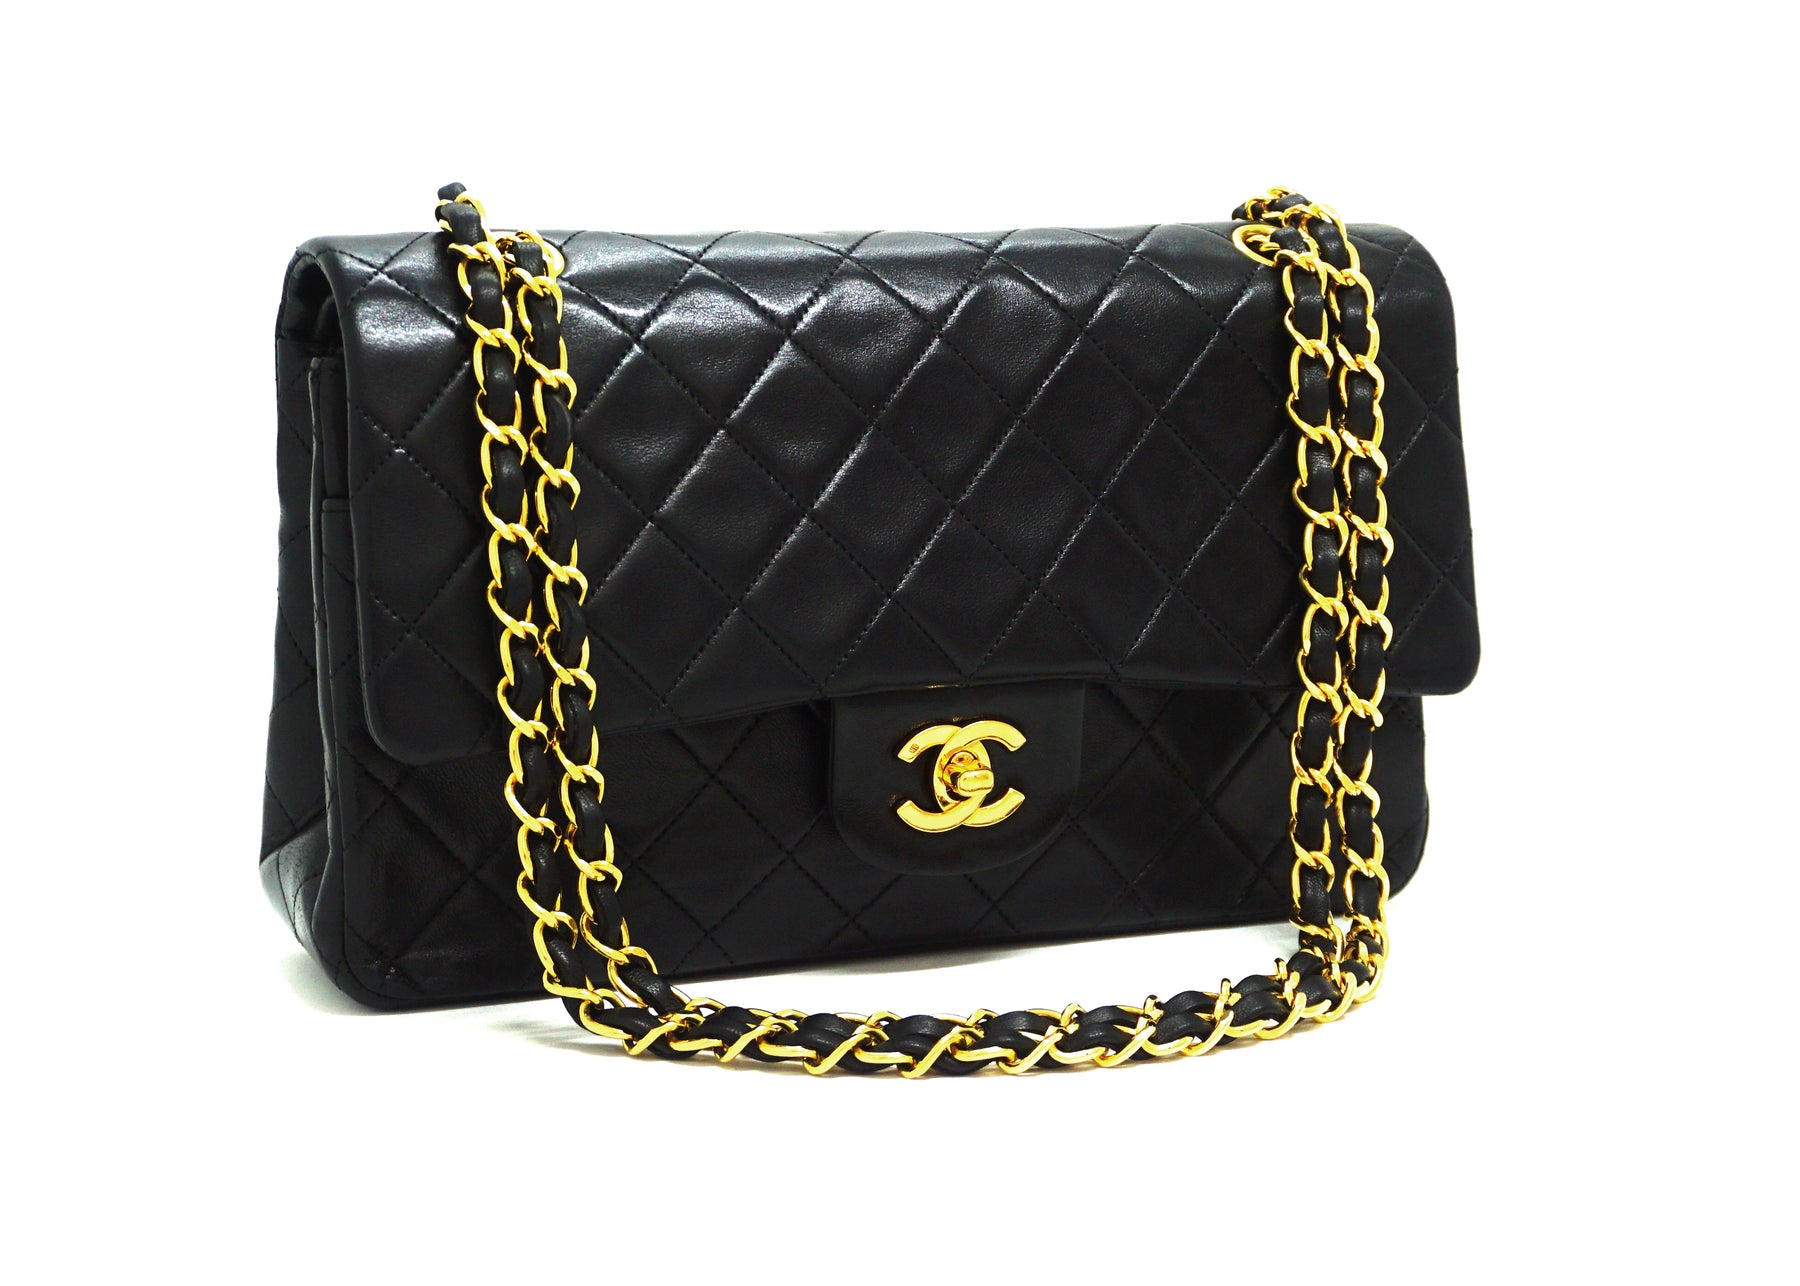 Chanel Vintage Flap Bag with Purse Pouch Black Lambskin 24K Gold